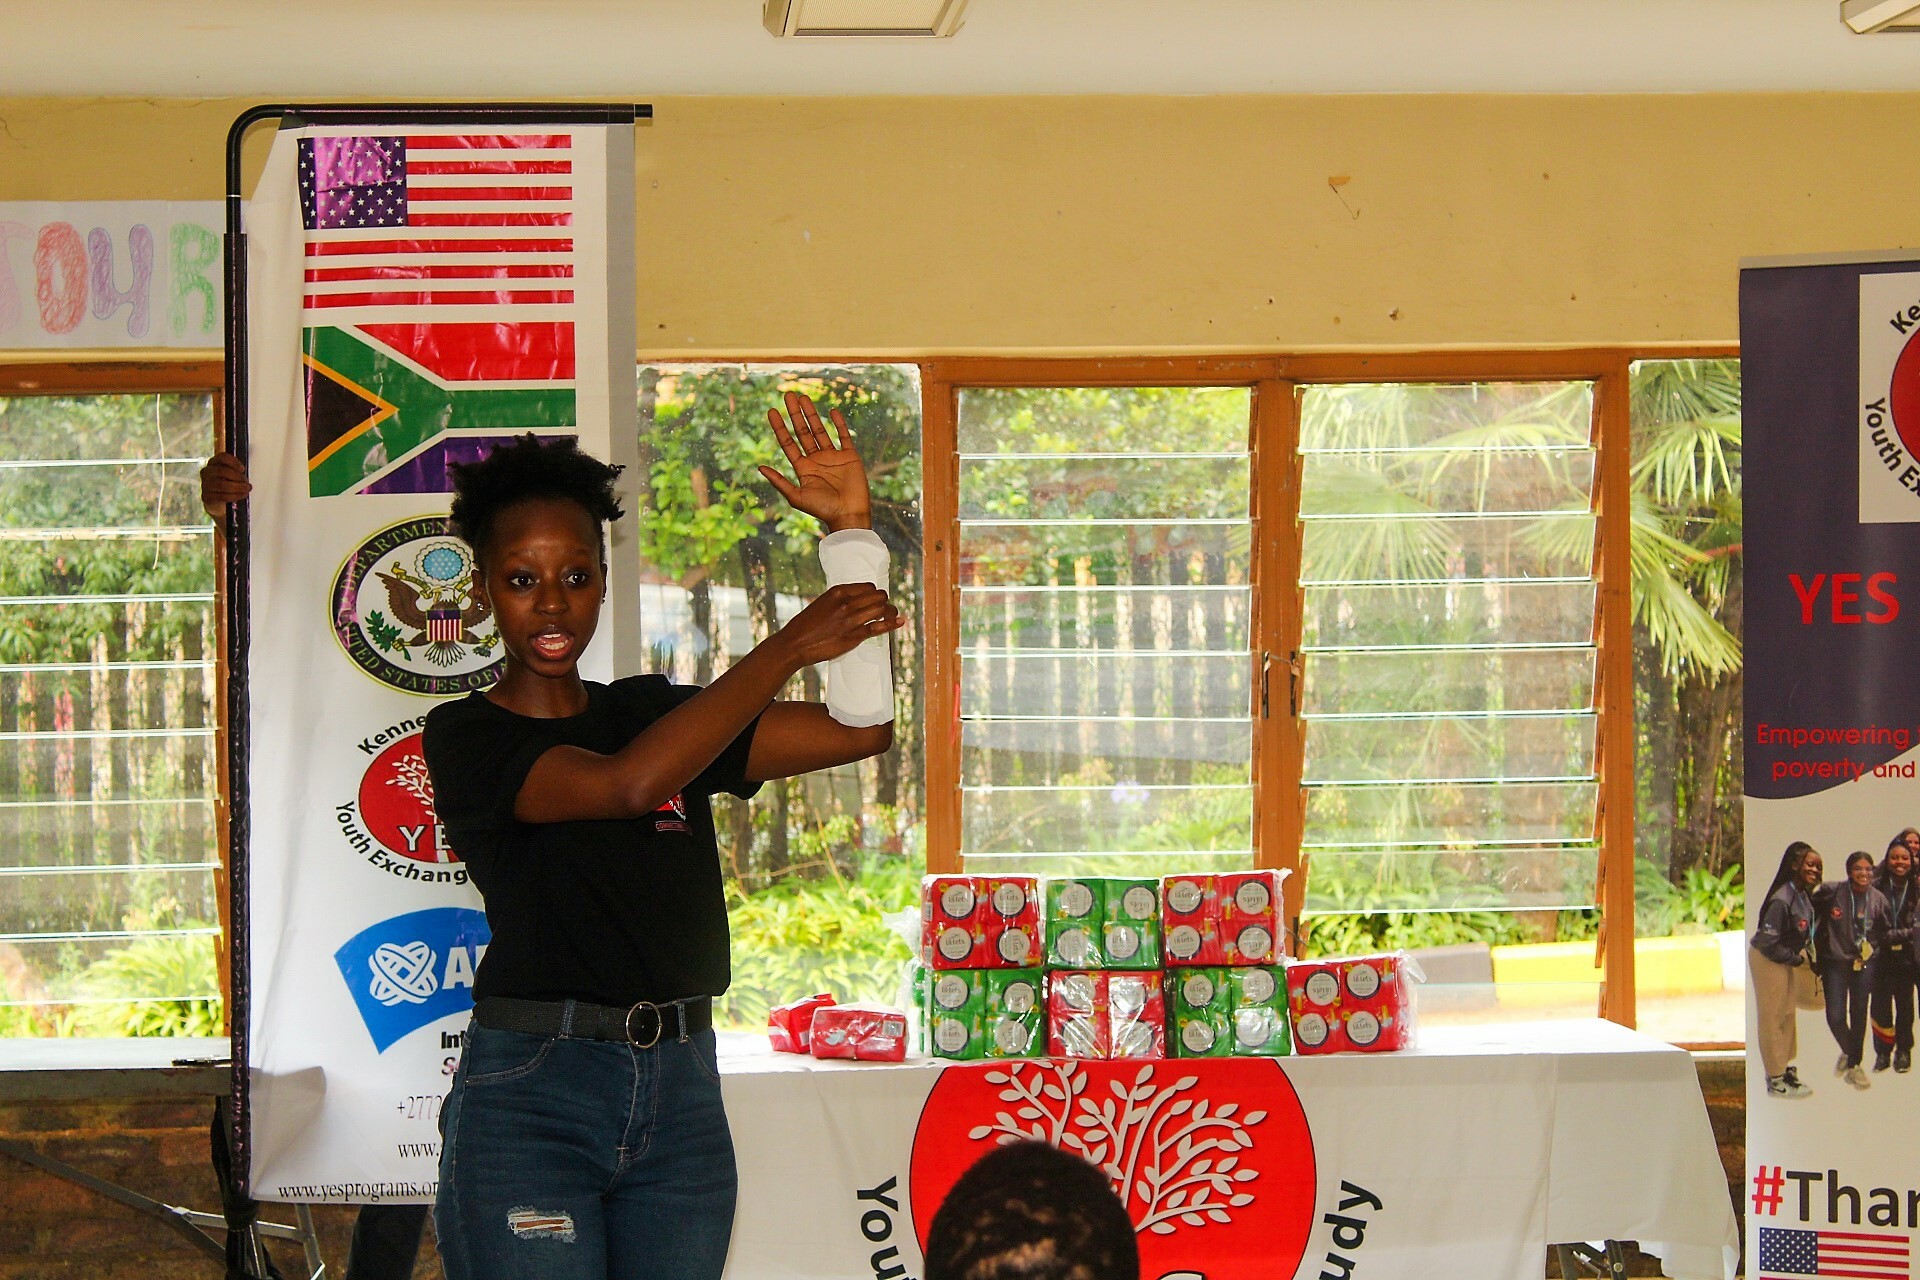 Alumna In South Africa Is Holding Up A Sanitary Pad Talking To A Group Of Young Women About Female Hygiene